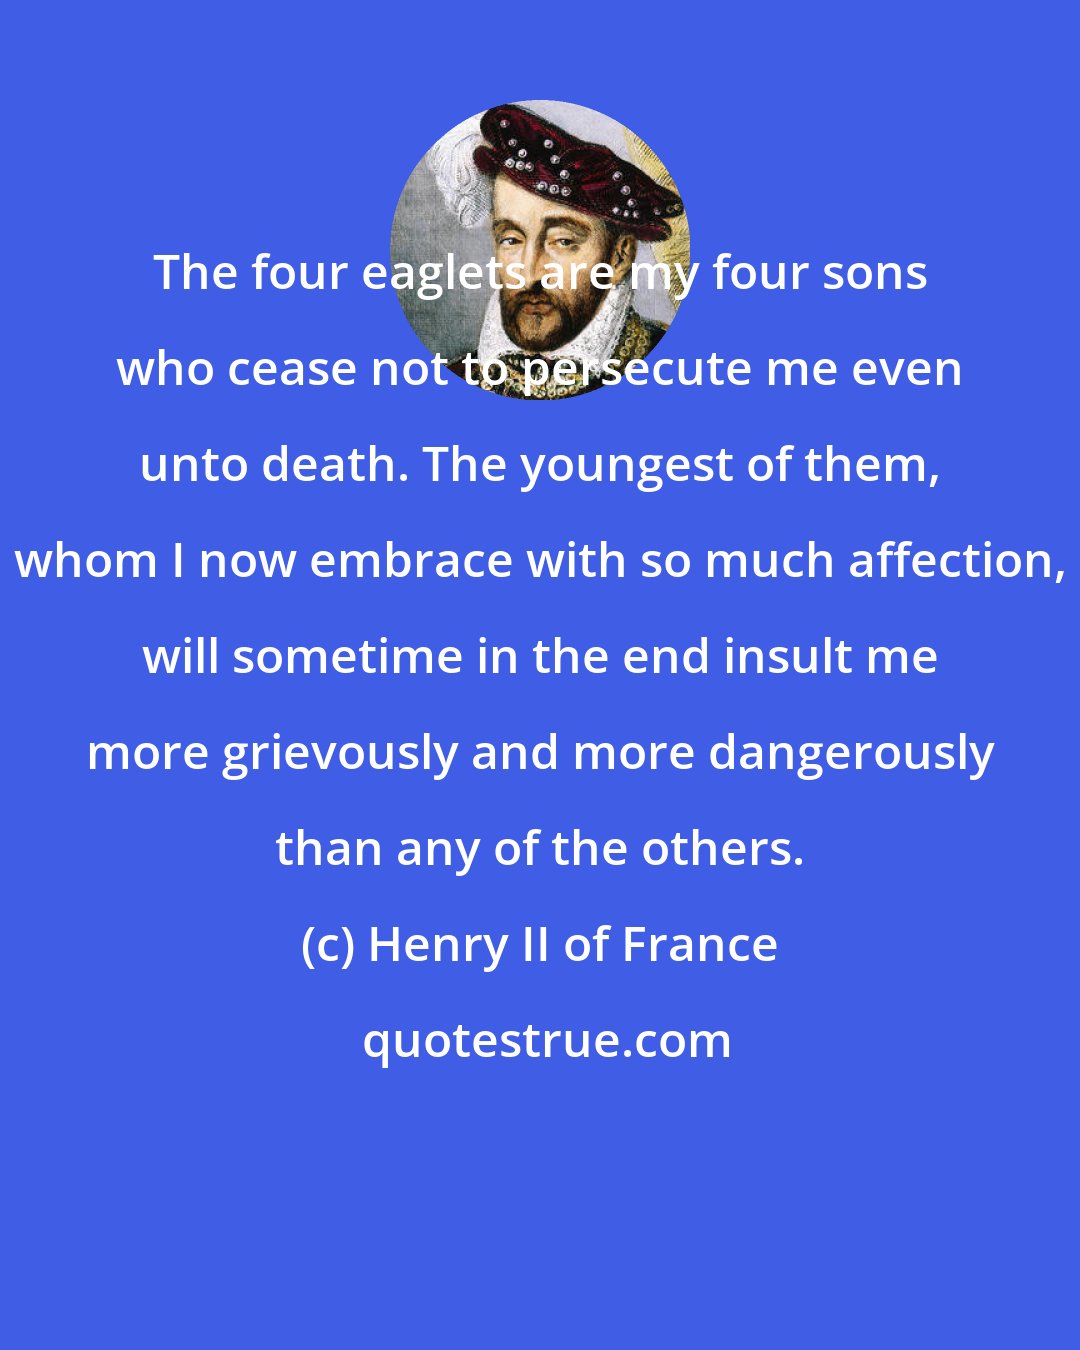 Henry II of France: The four eaglets are my four sons who cease not to persecute me even unto death. The youngest of them, whom I now embrace with so much affection, will sometime in the end insult me more grievously and more dangerously than any of the others.